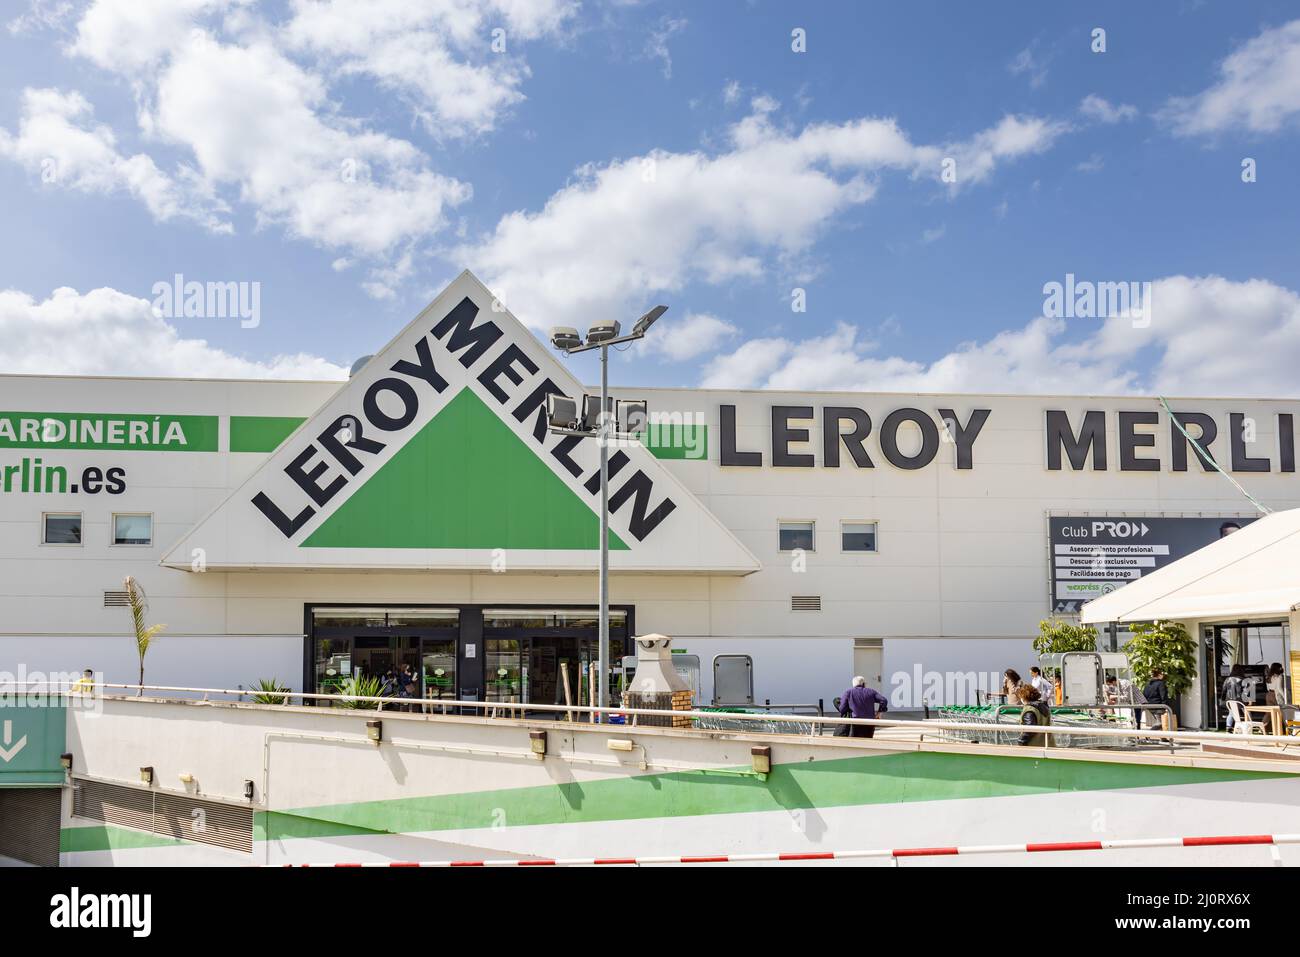 Huelva, Spain - March 19, 2022: Leroy Merlin store in Huelva. Leroy Merlin is a French headquartered home improvement and gardening retailer serving s Stock Photo